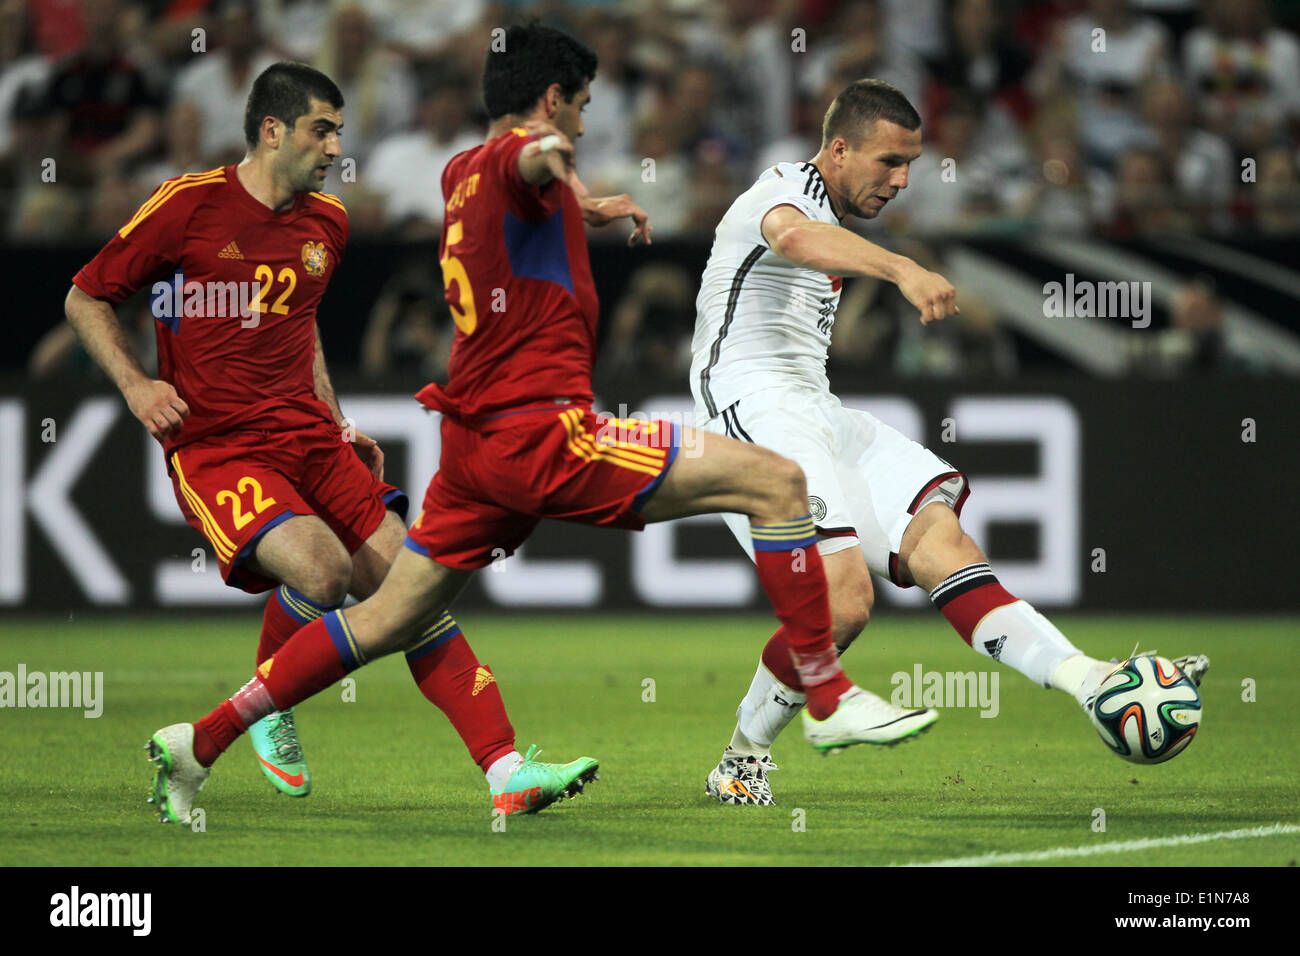 Mainz, Germany. 06th June, 2014. Germany's Lukas Podolski in action during the international friendly match between Germany and Armenia at Coface Arena in Mainz, Germany, 06 June 2014. Photo: Fredrik von Erichsen/dpa/Alamy Live News Stock Photo